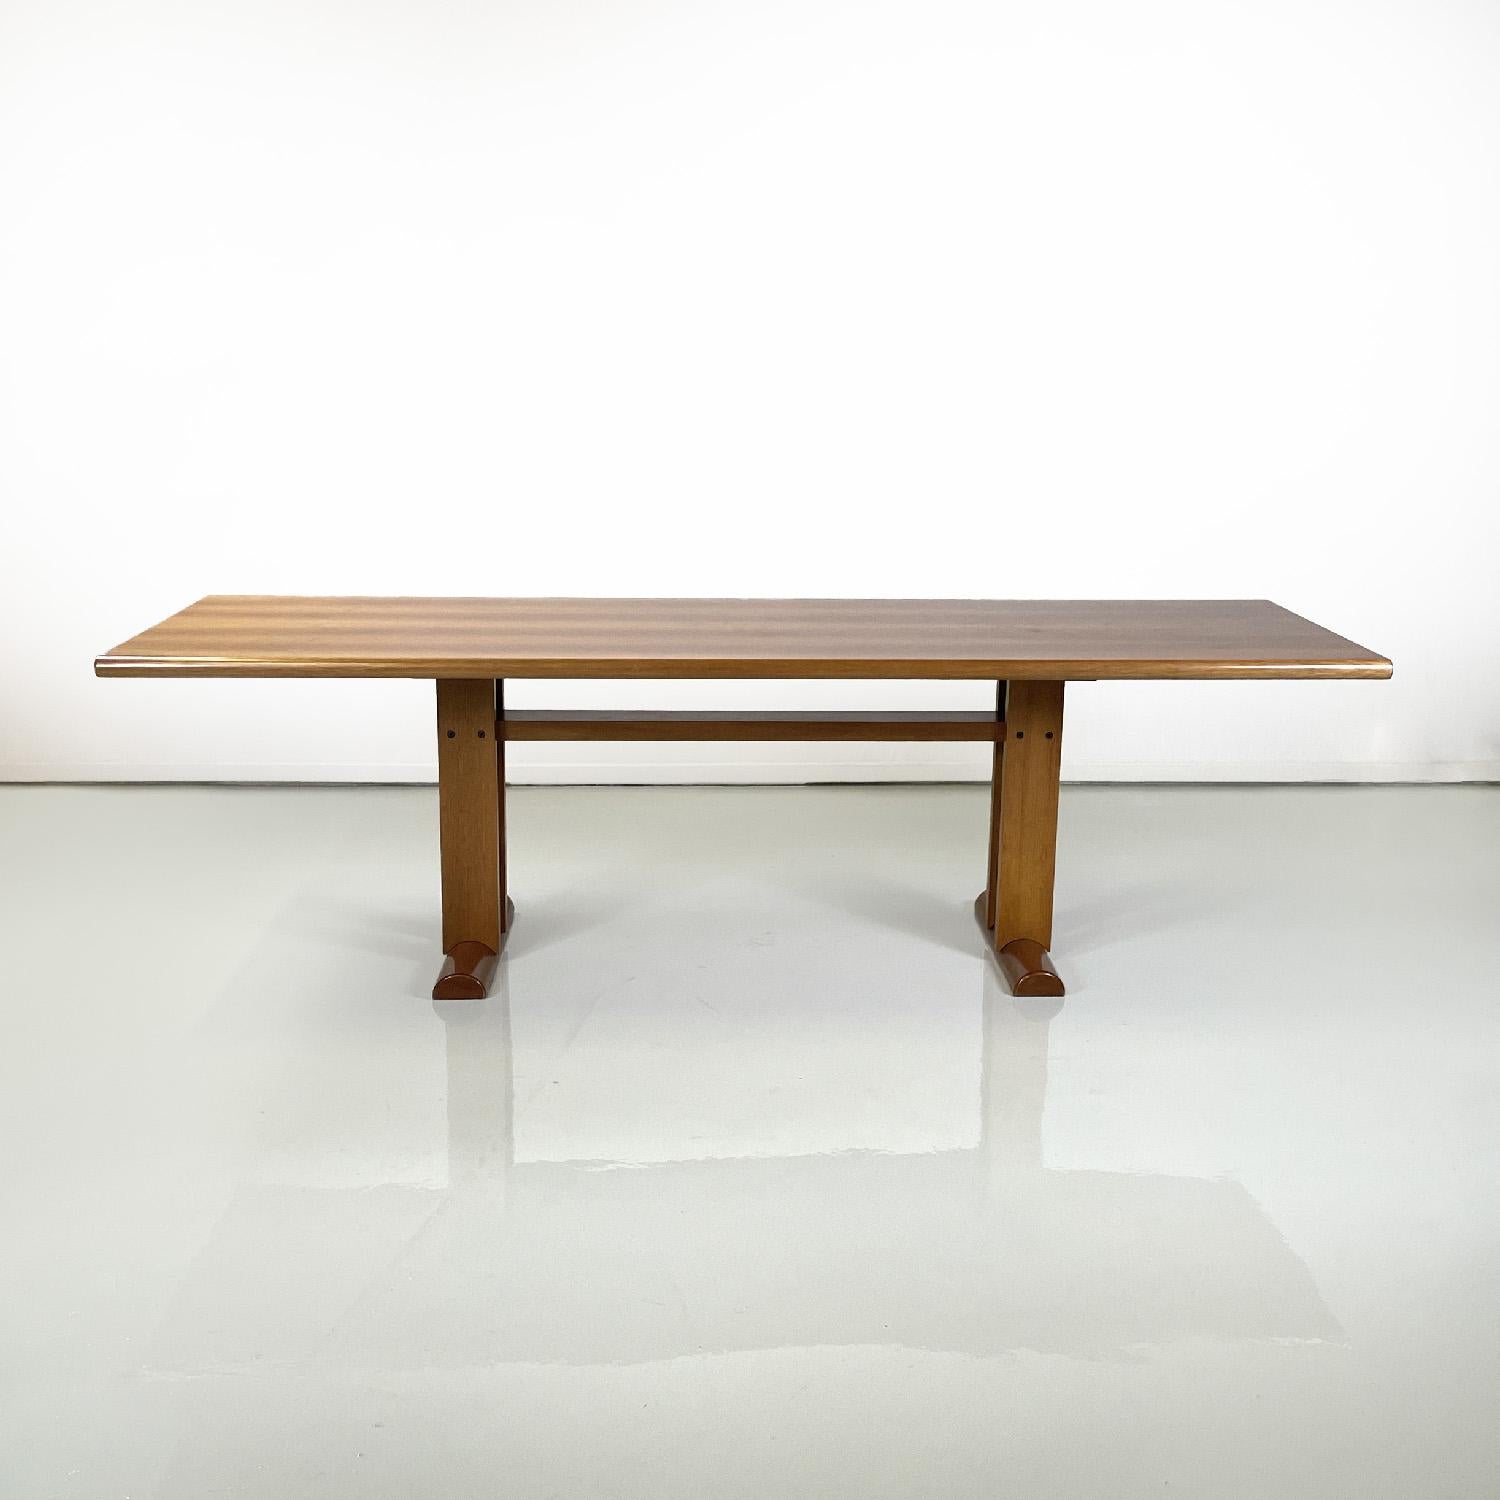 Italian modern rectangular wooden dining table, 1980s
Rectangular dining table entirely in wood. The top has sides with a semicircular profile, the load-bearing structure is made up of four vertical strips and a crosspiece that joins them with a